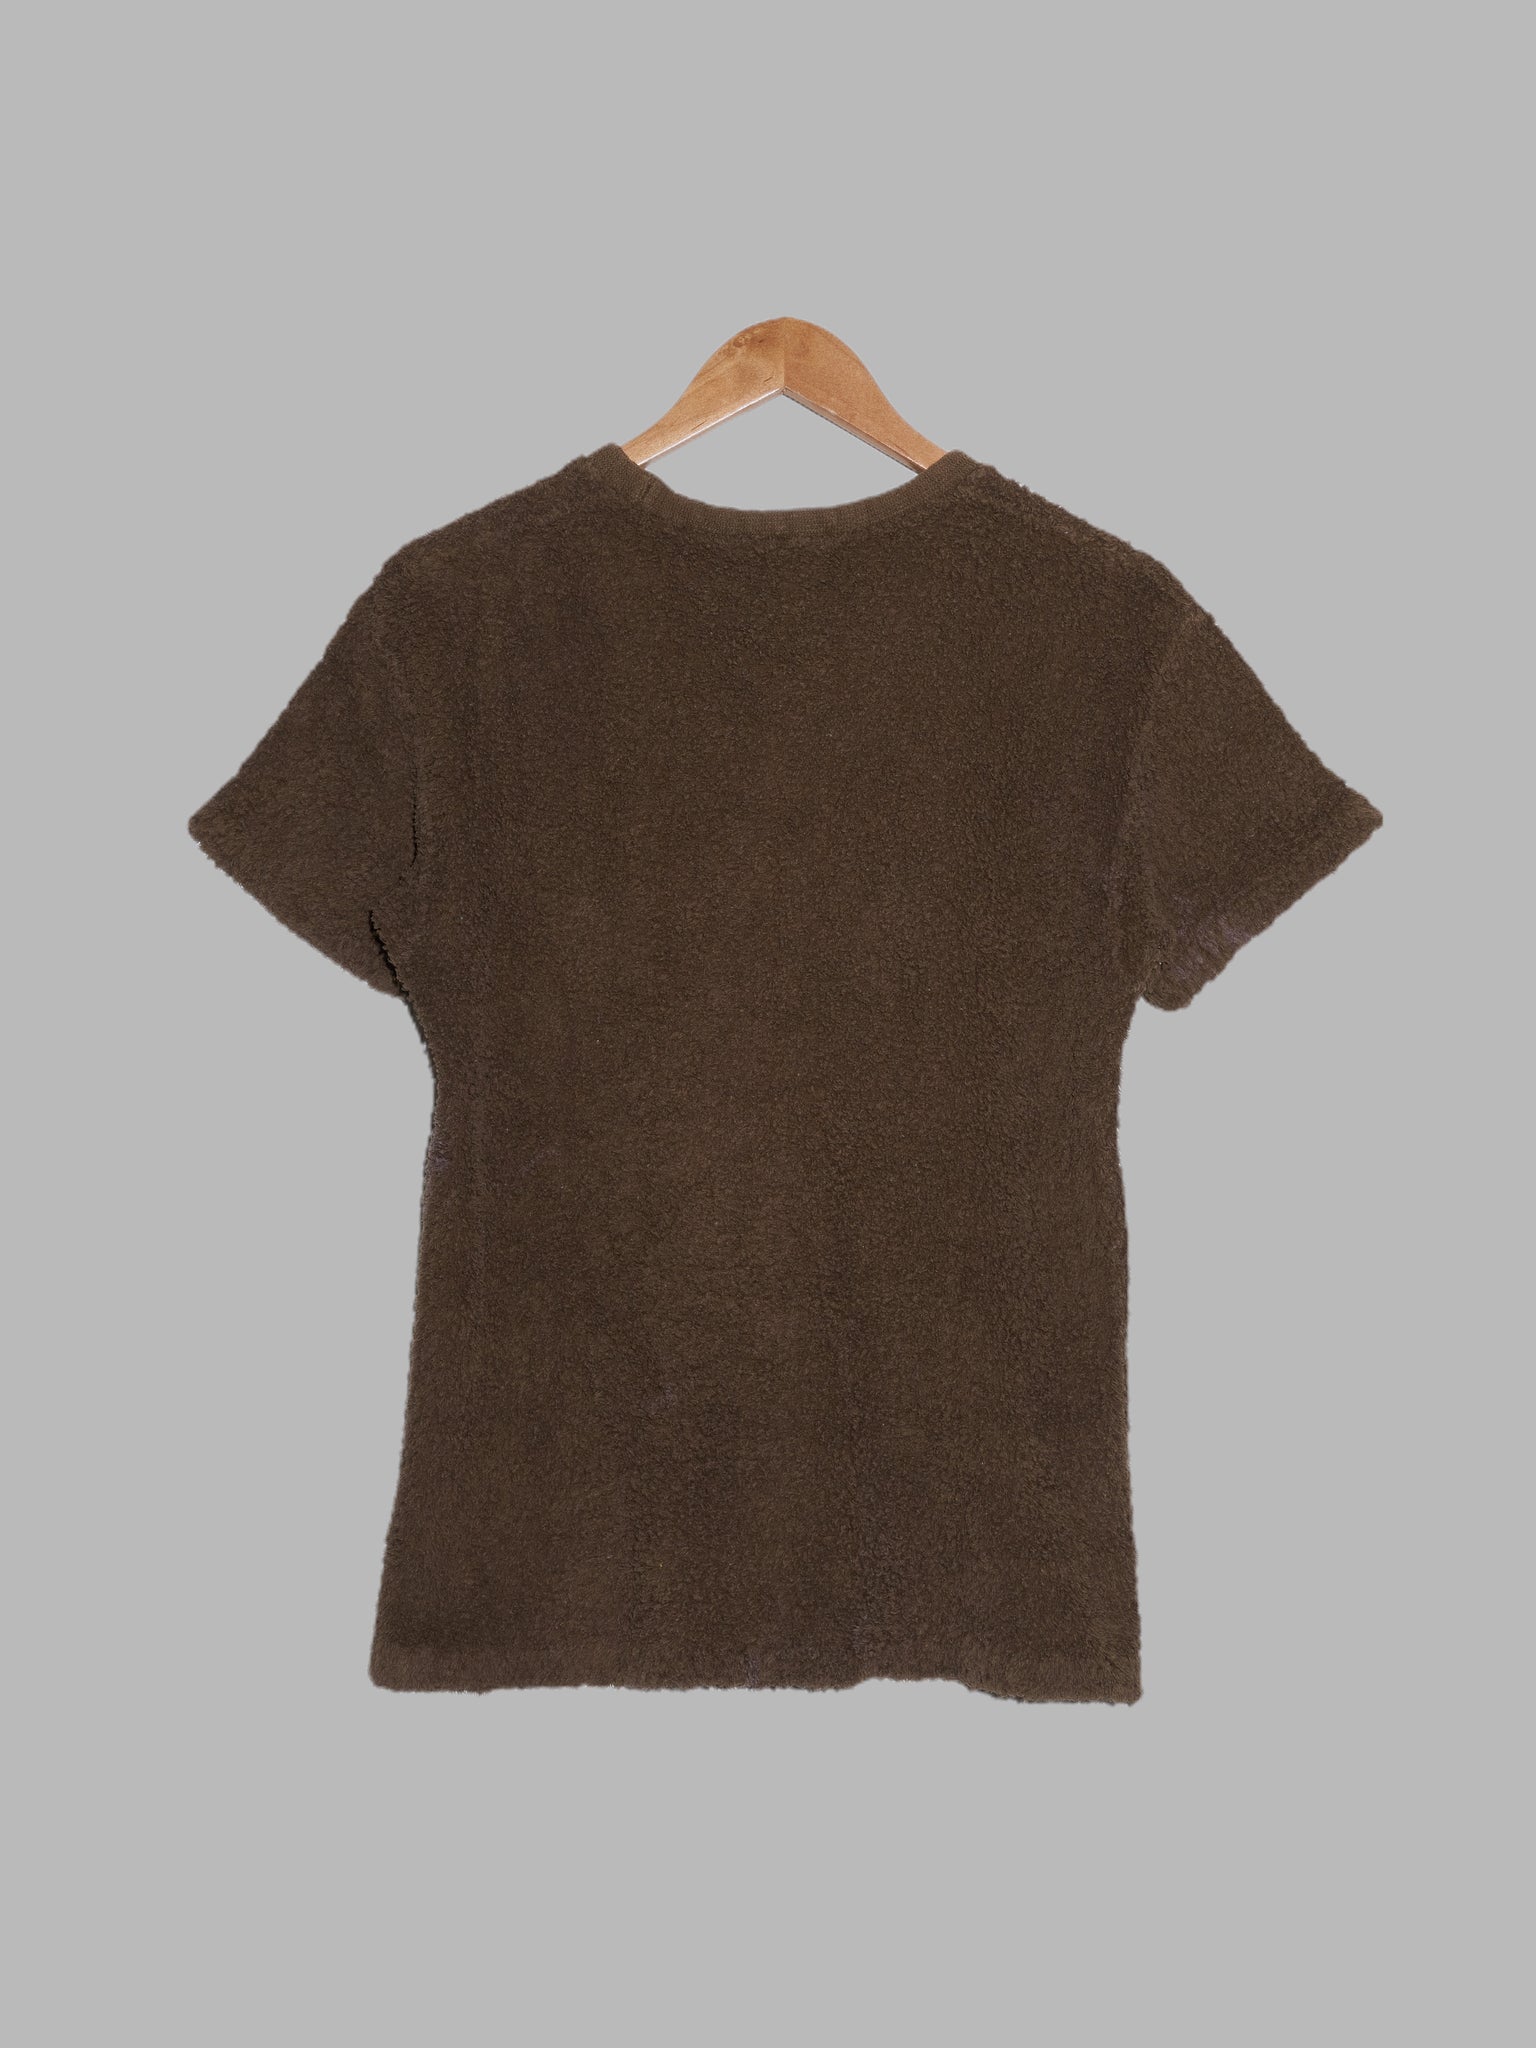 Homme Comme des Garcons mid 1980s brown towelling t-shirt - approx mens XS S